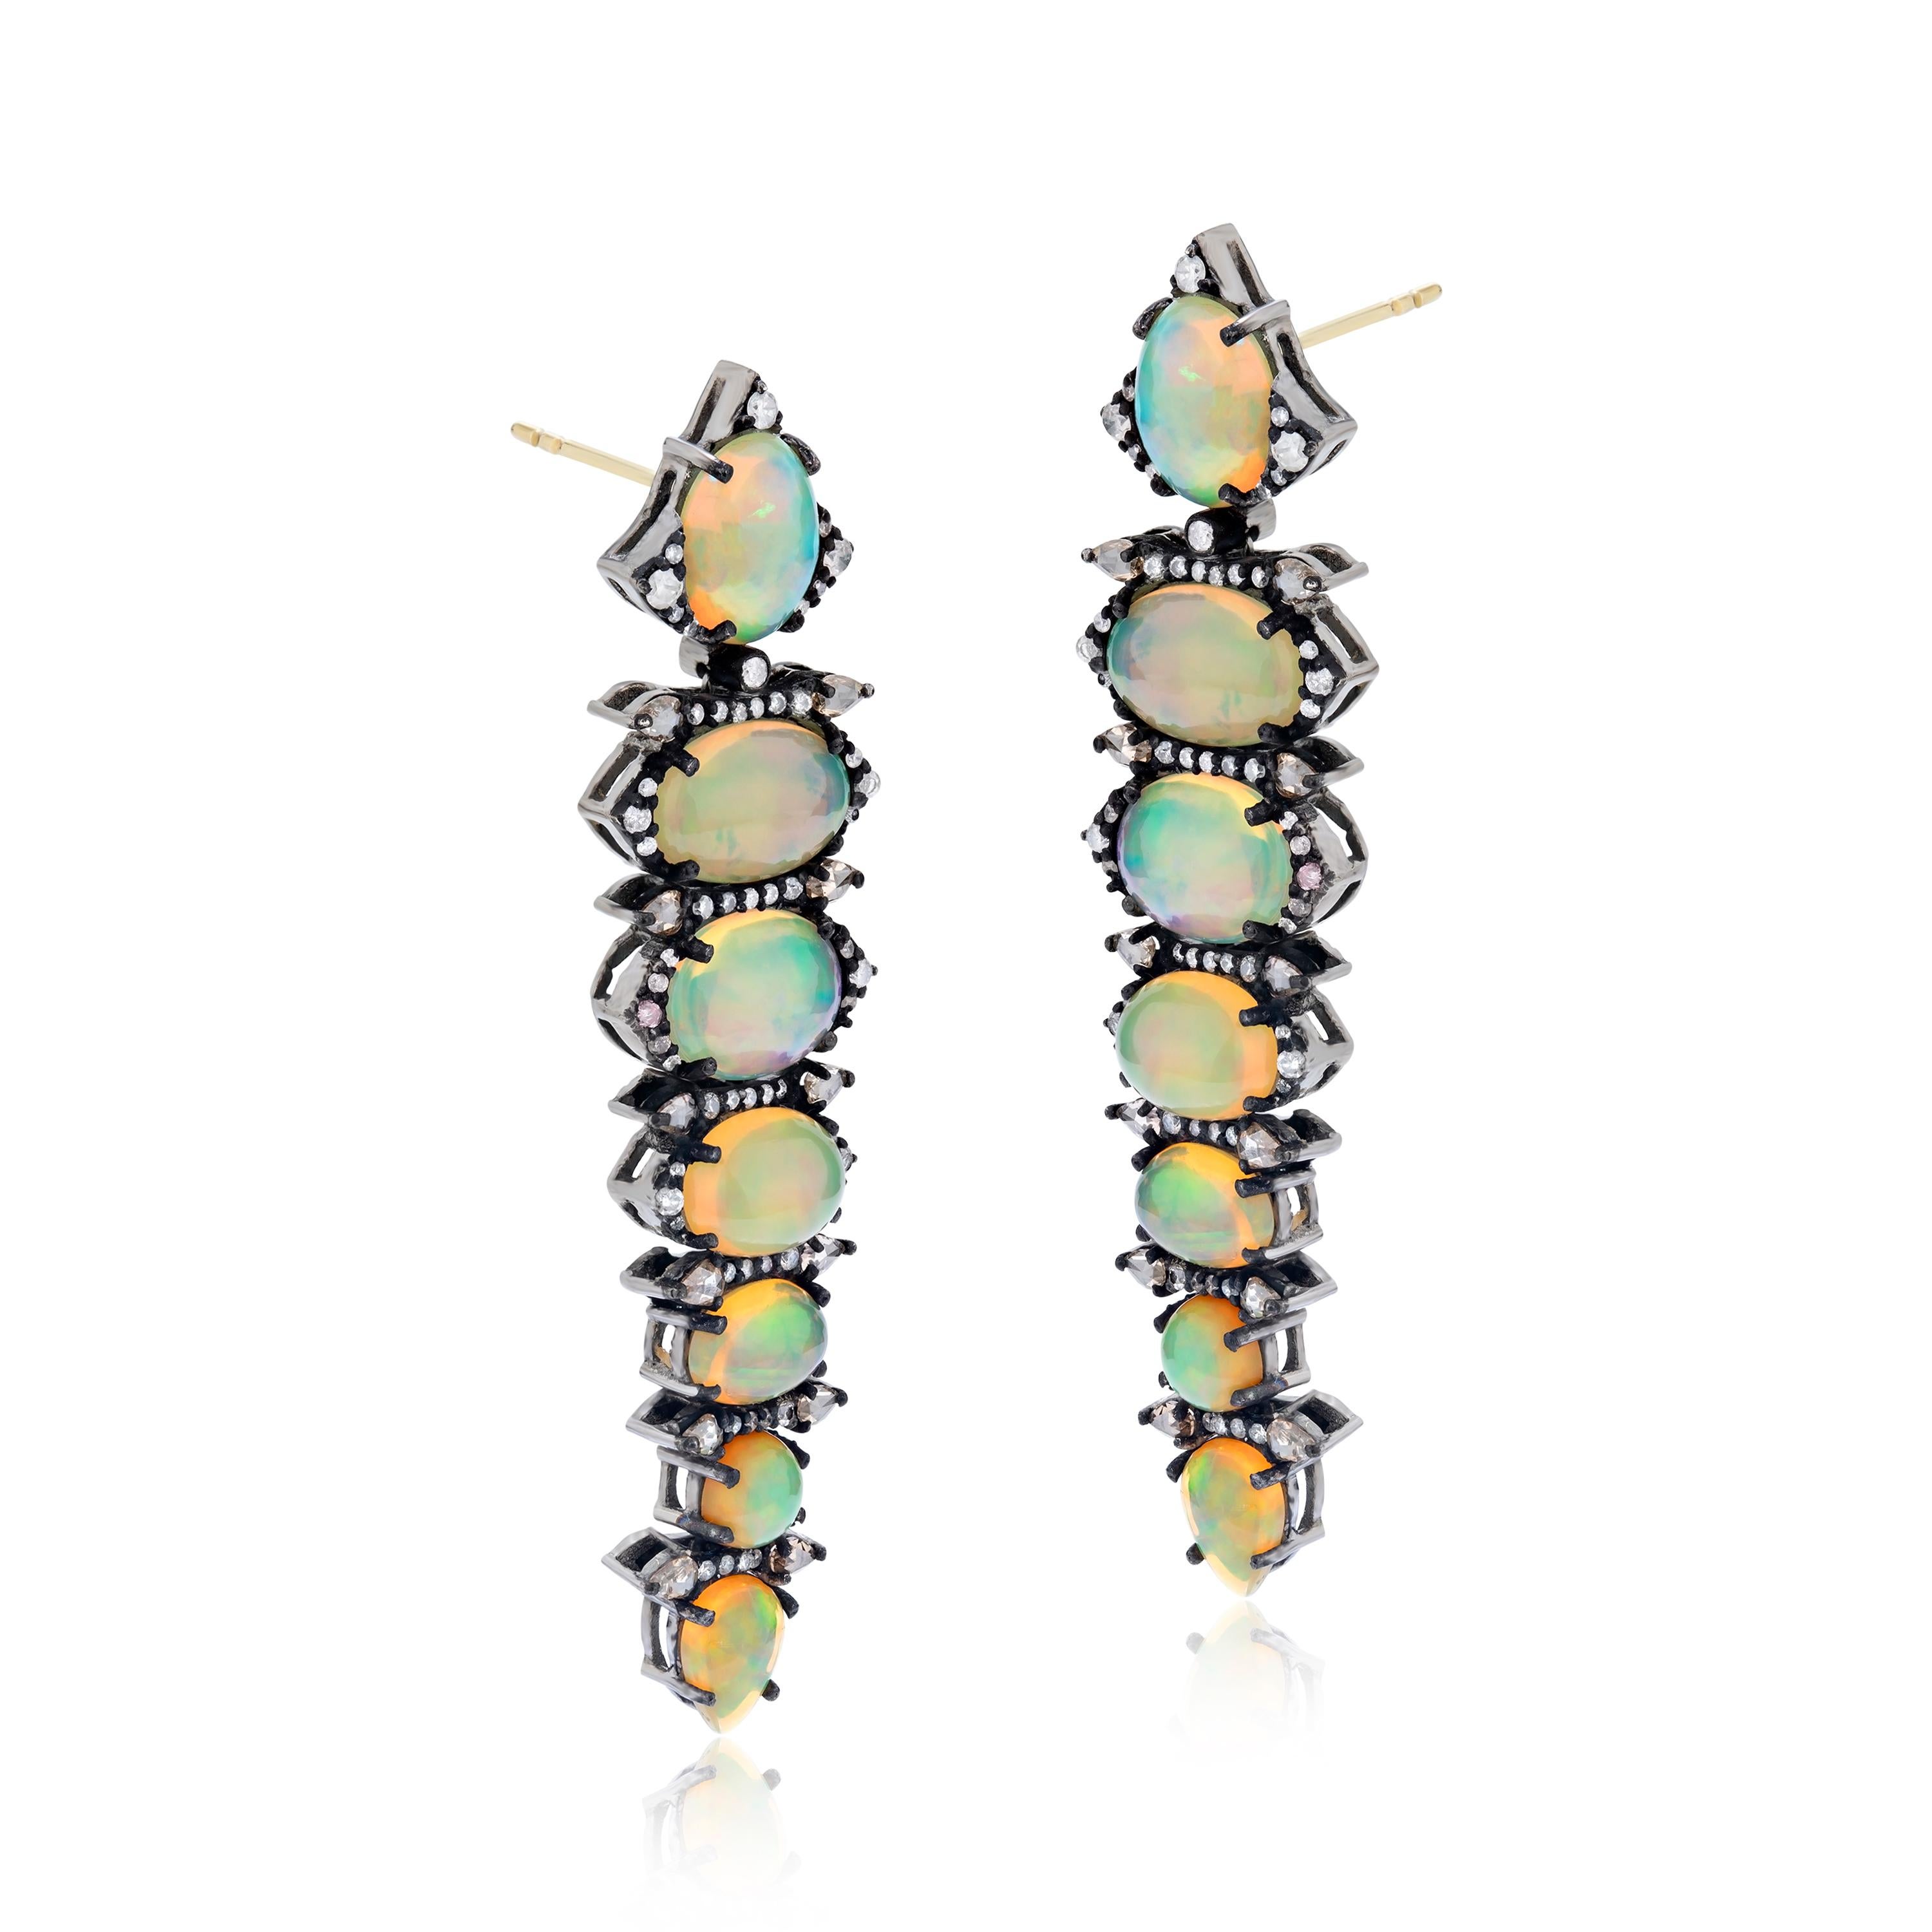 This Gemistry, Victorian 11.64 Ct. T.W. Diamond and Ethiopian Opal Drop Earrings features row of graduating drops of shinning round , oval and pear Ethiopian opals enclosed by pave diamond halos on a black rhodium polished 18k/925 surface. This